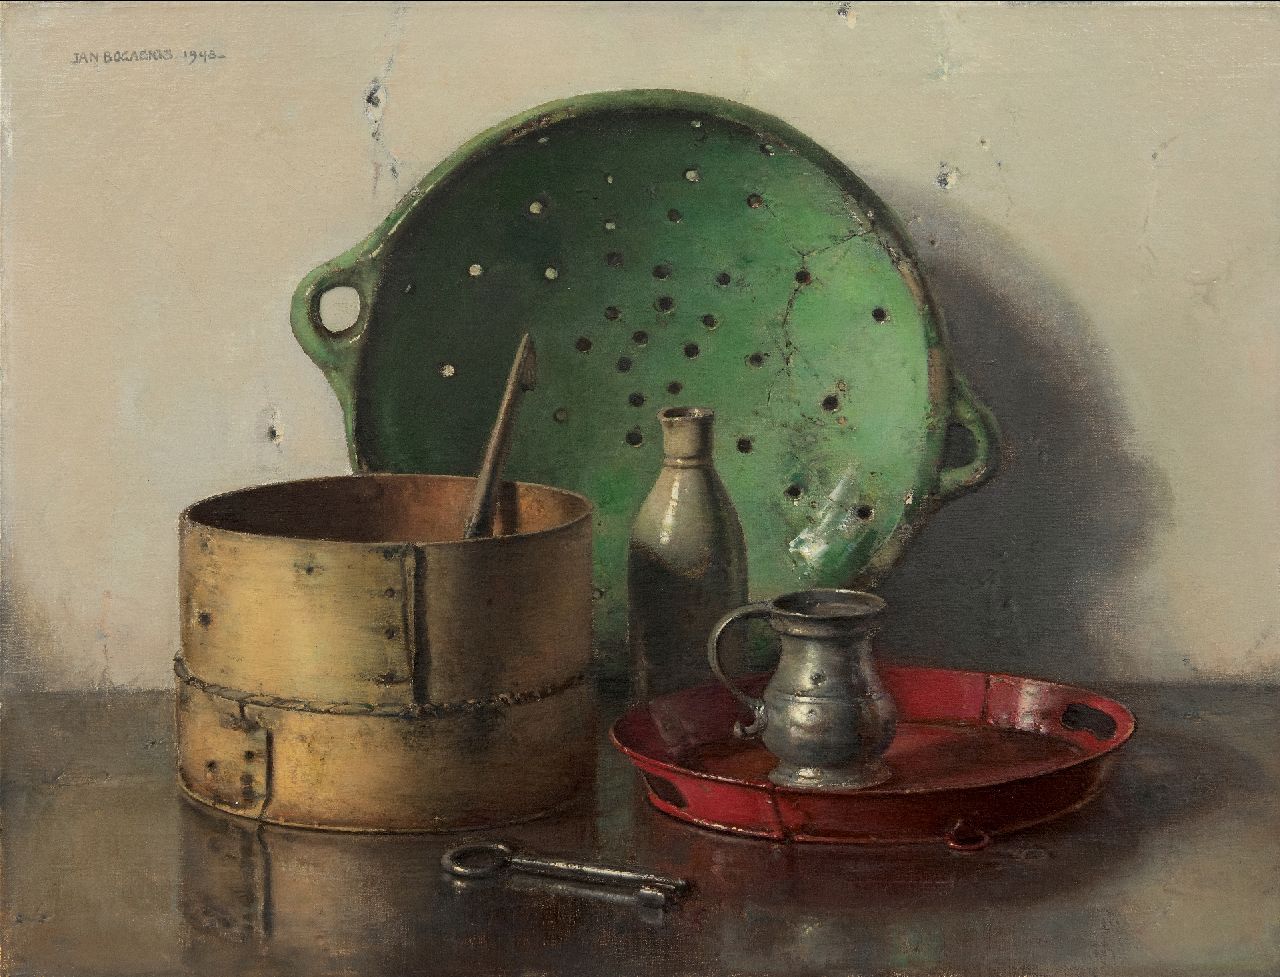 Bogaerts J.J.M.  | Johannes Jacobus Maria 'Jan' Bogaerts, Still life with a green strainer, oil on canvas 50.2 x 66.1 cm, signed u.l. and dated 1948